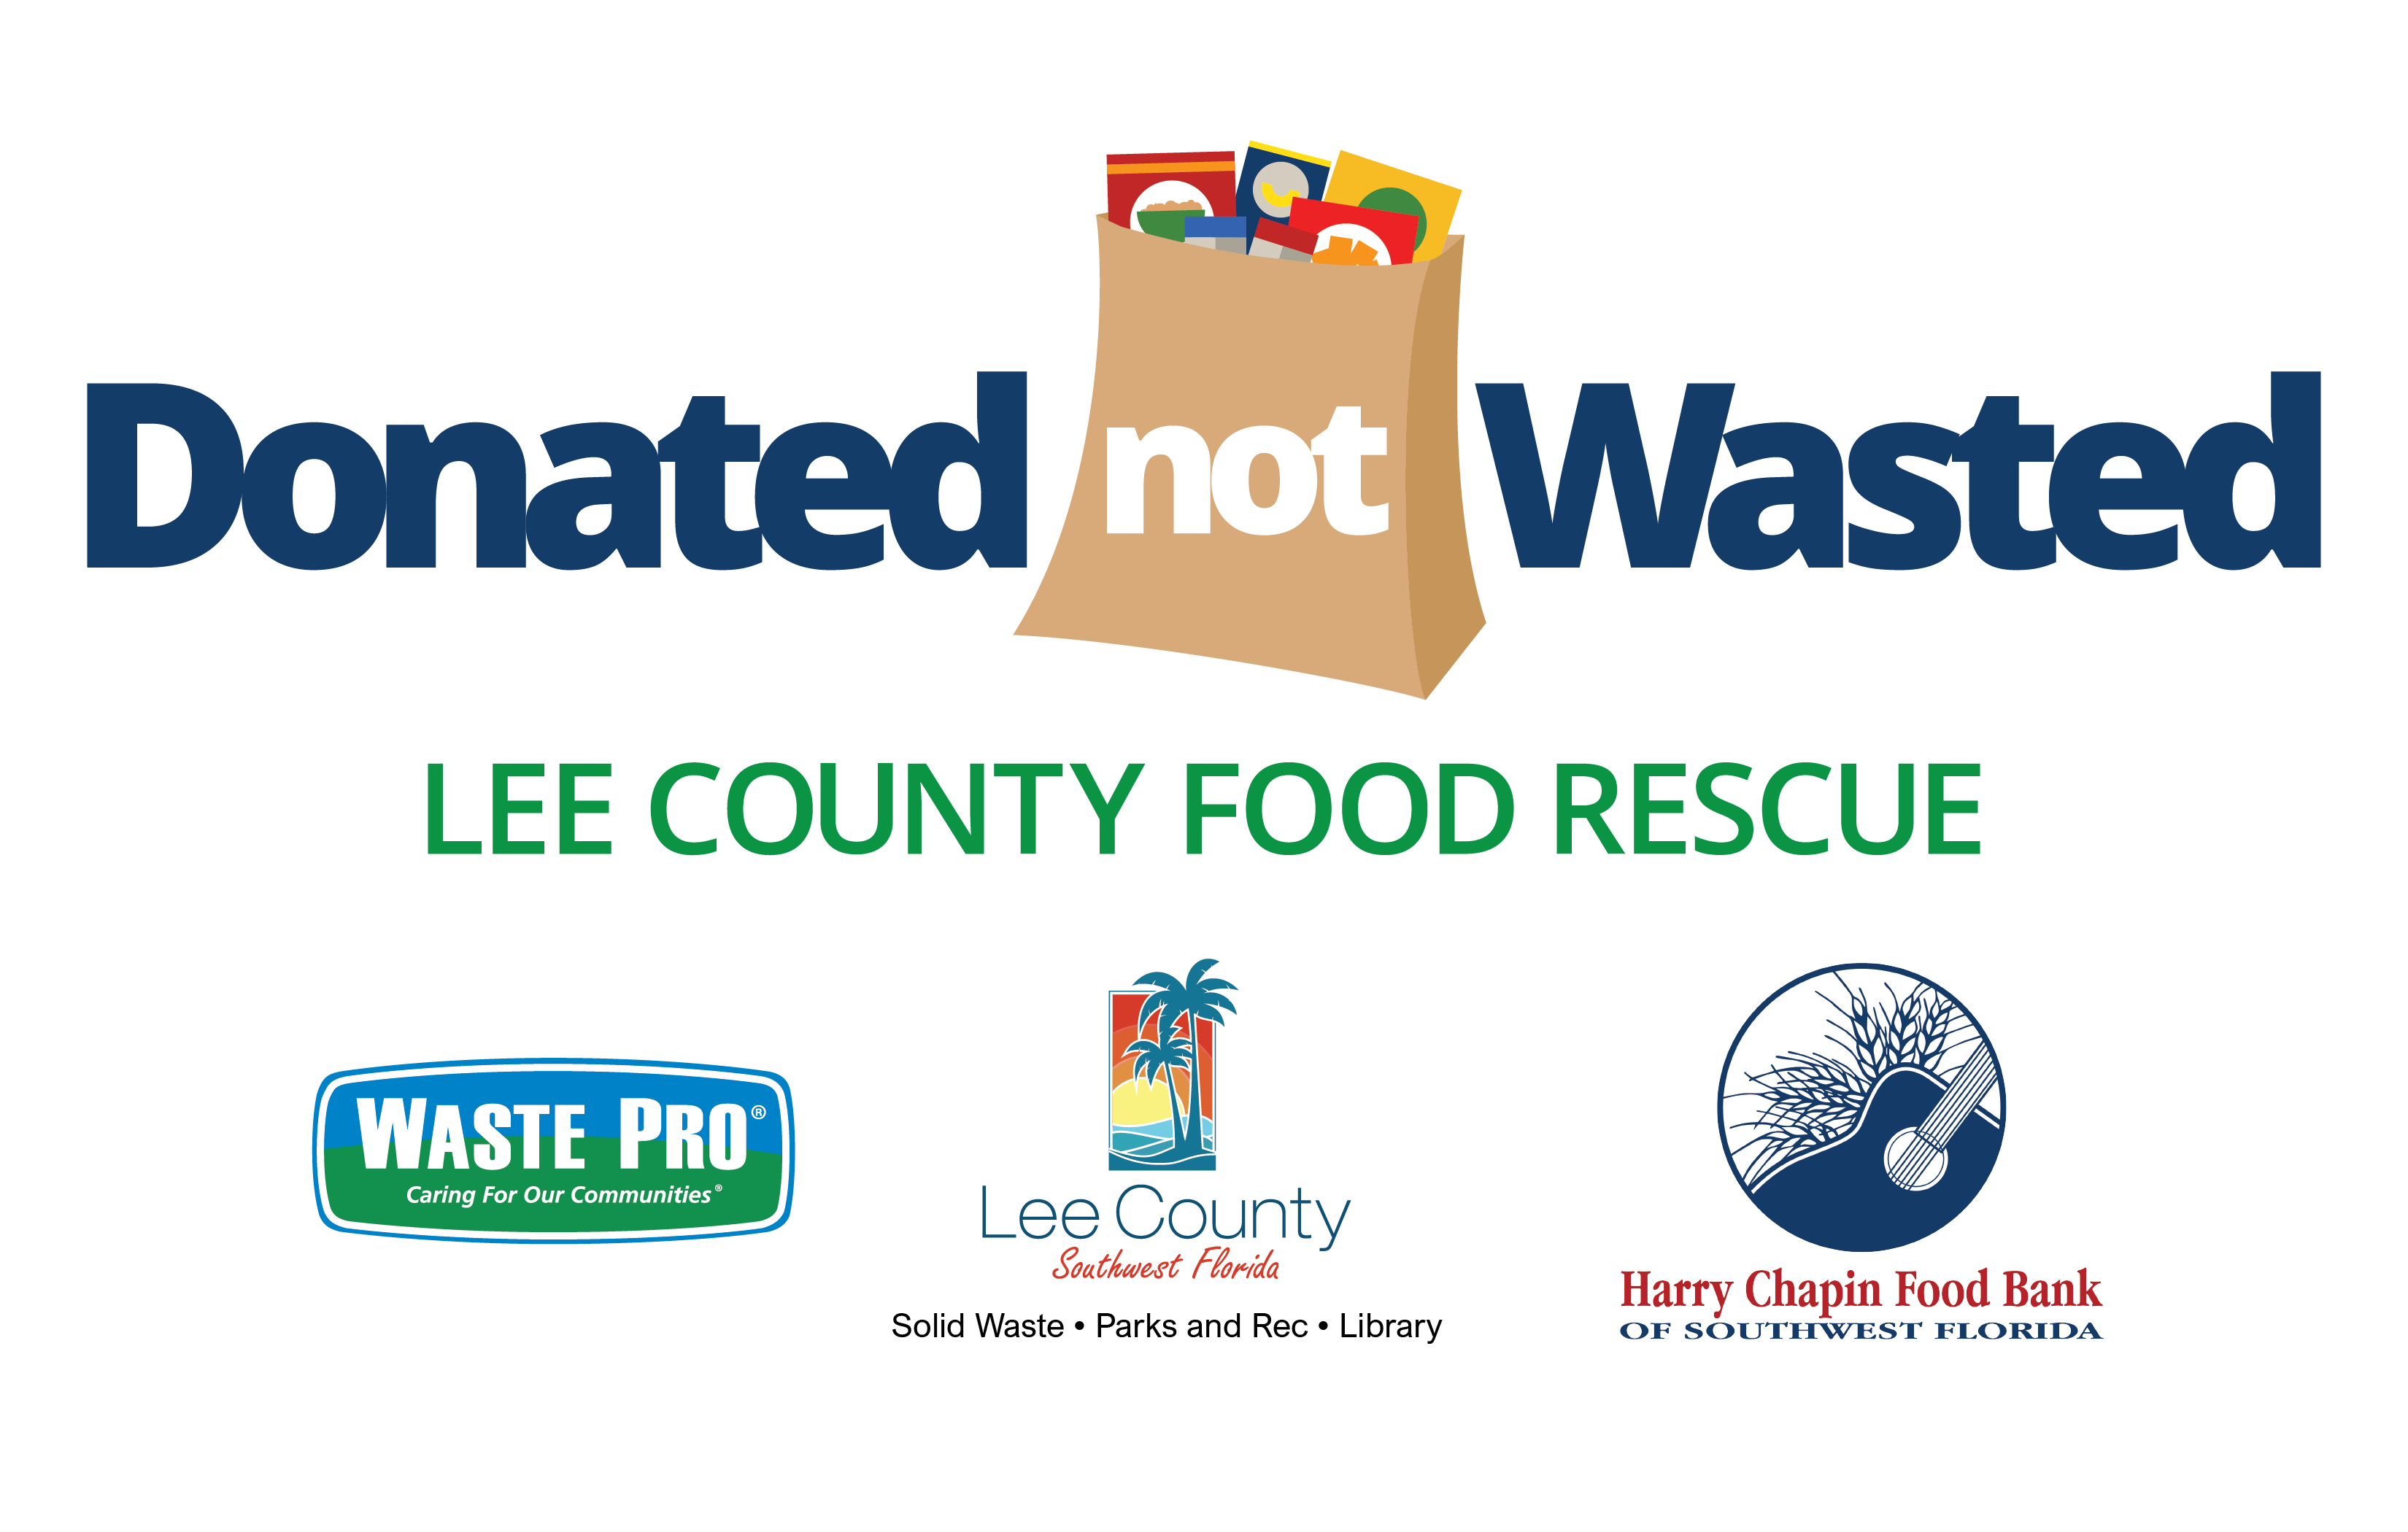 FOOD_DRIVE_Donated_Not_Wasted_logo_with_4sponsors.jpg